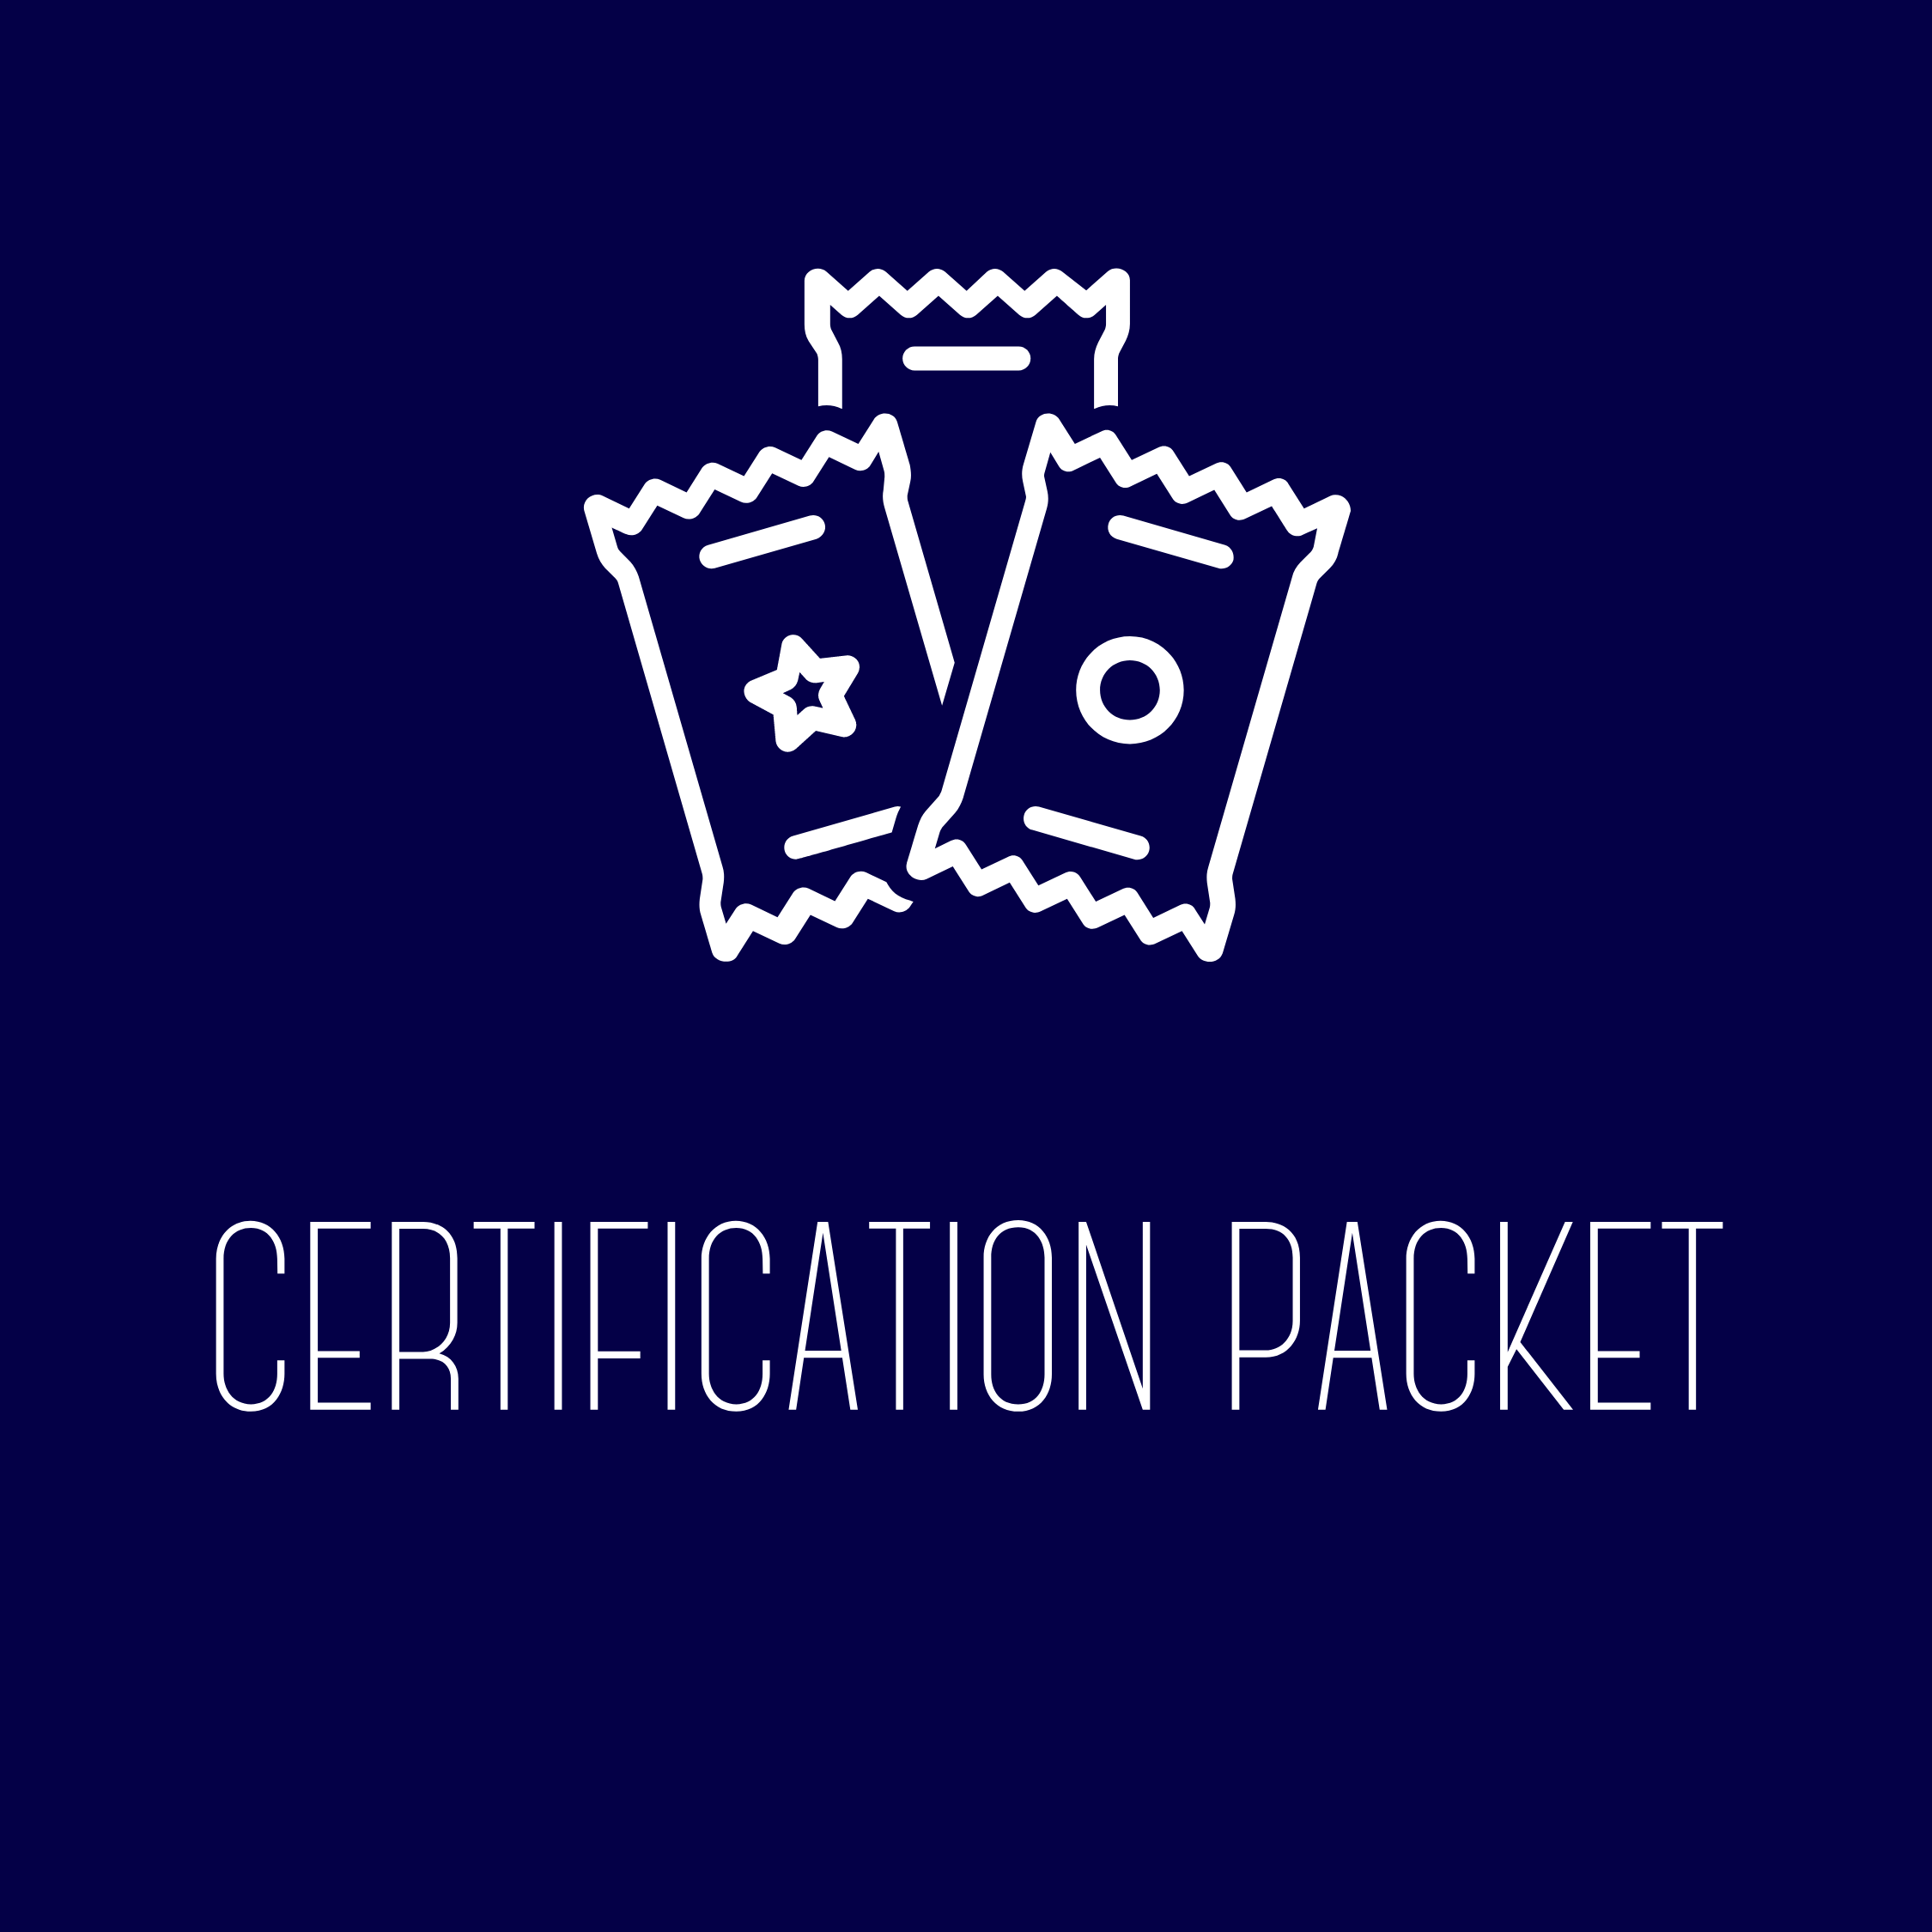 Certification Packet